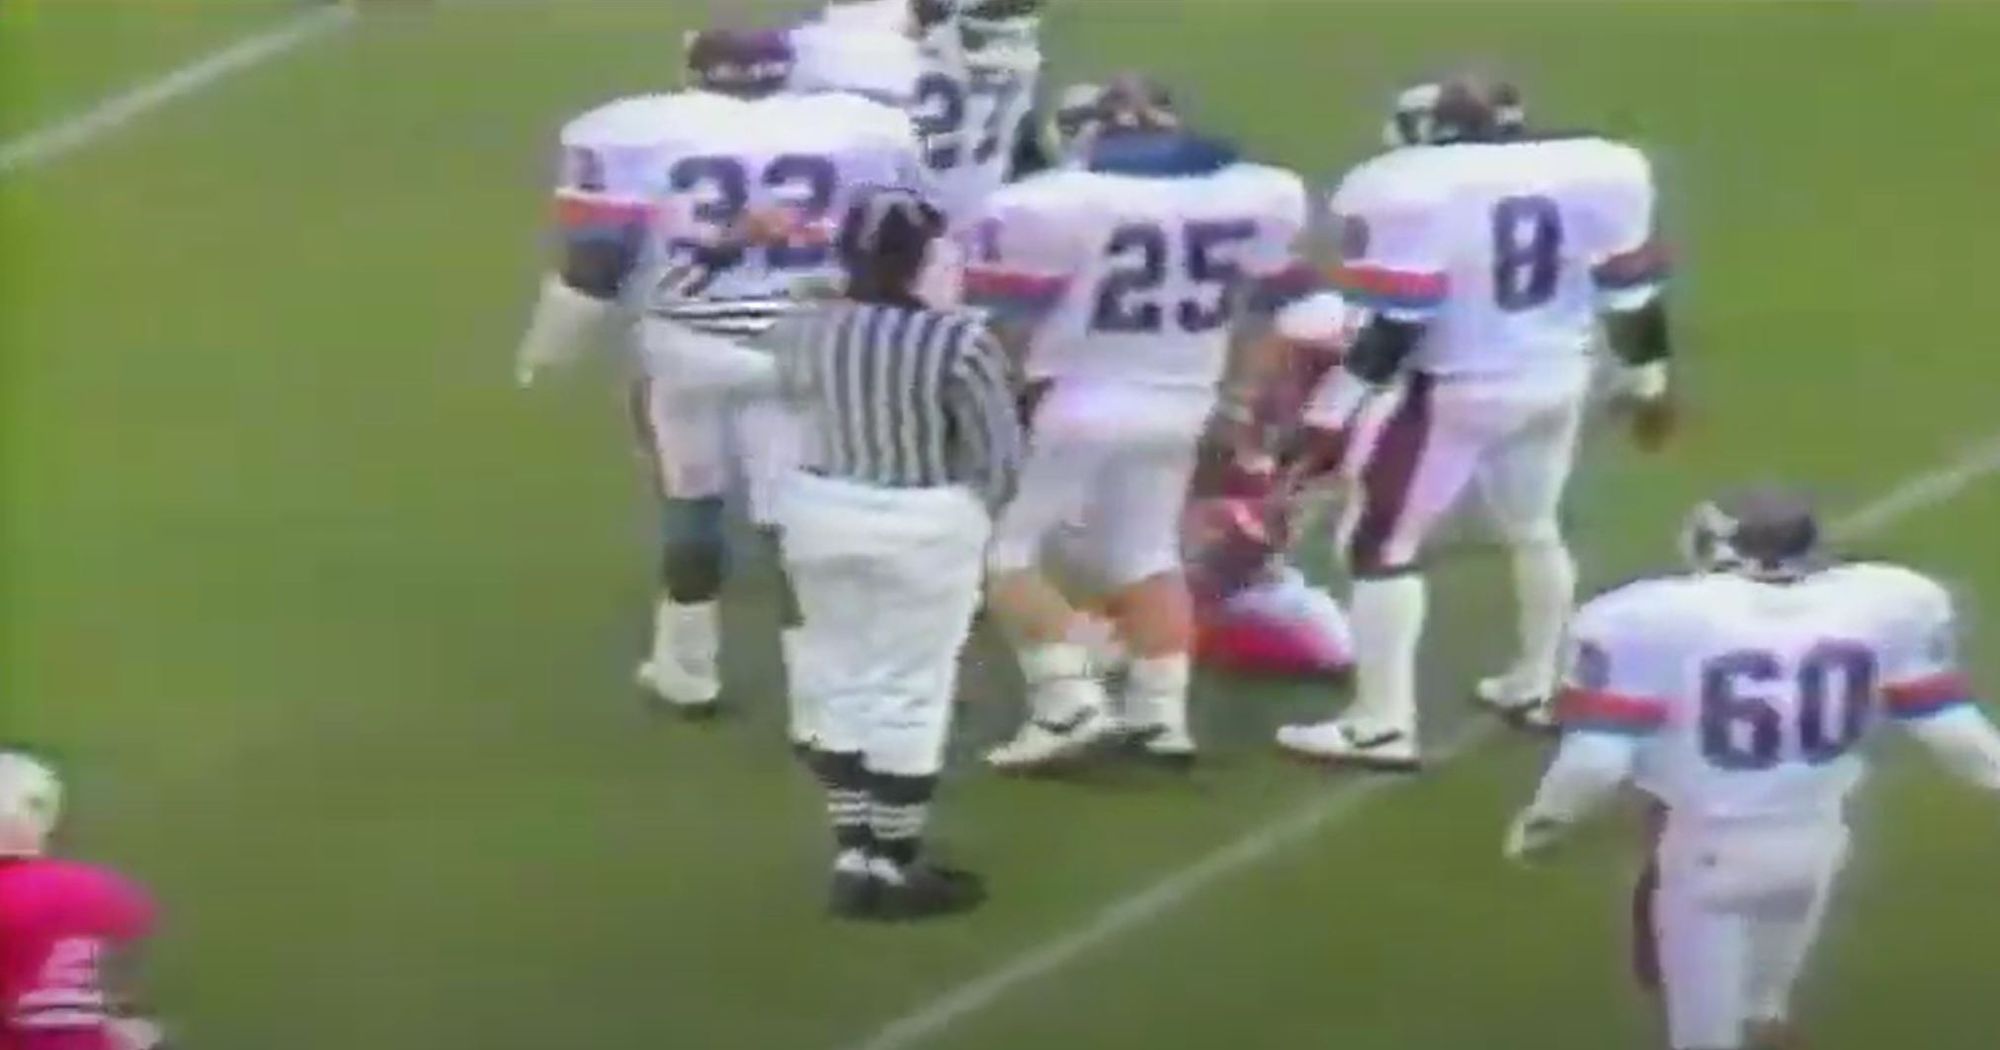 Uniform of the Day: Kansas rips off the 1986 New York Giants